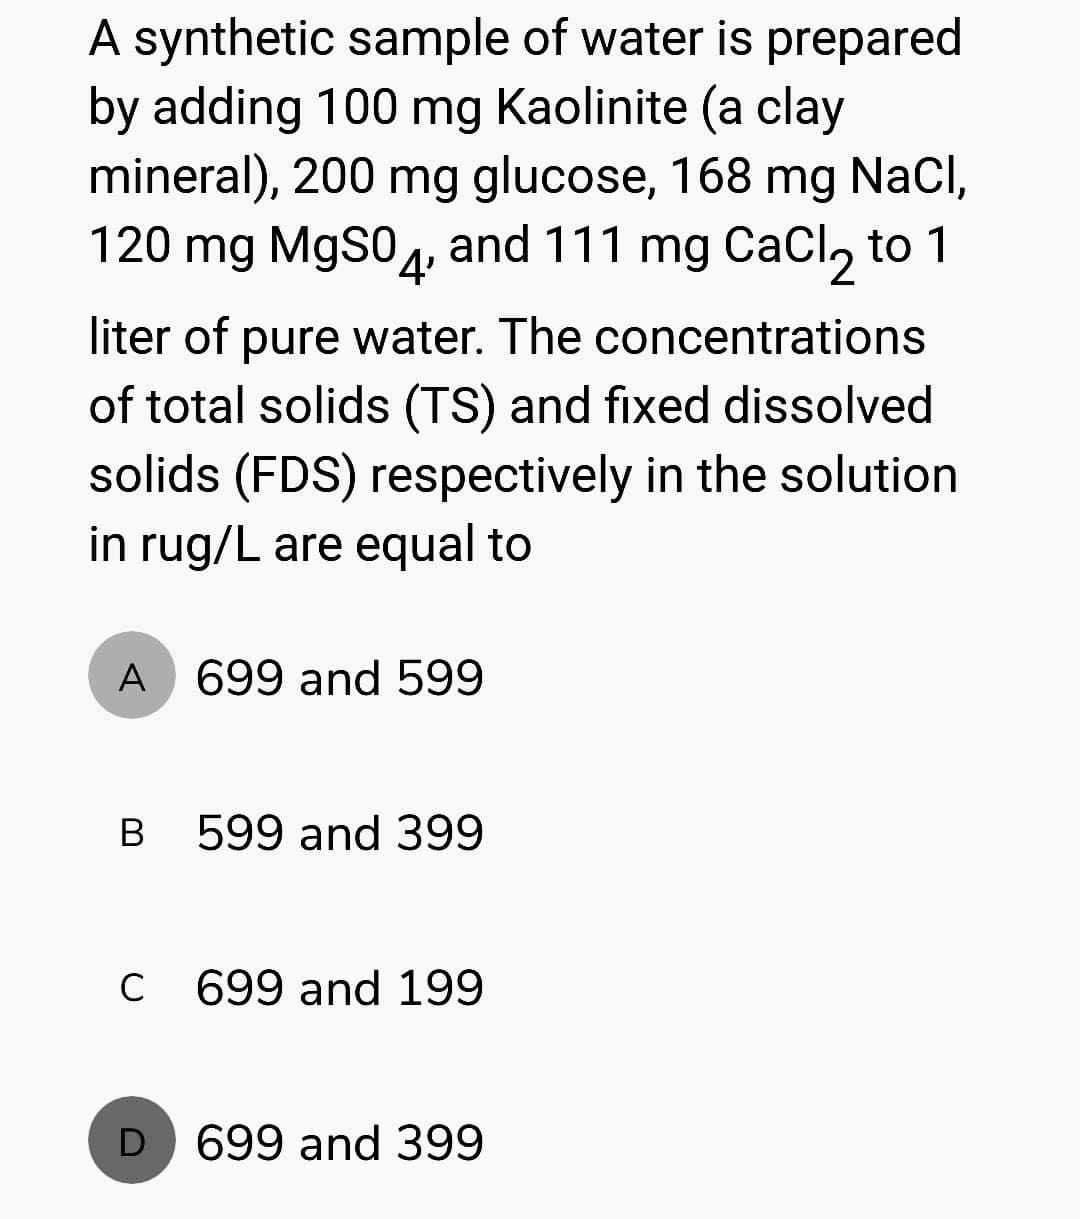 A synthetic sample of water is prepared
by adding 100 mg Kaolinite (a clay
mineral), 200 mg glucose, 168 mg NaCl,
120 mg MgSO4, and 111 mg CaCl₂ to 1
liter of pure water. The concentrations
of total solids (TS) and fixed dissolved
solids (FDS) respectively in the solution
in rug/L are equal to
A 699 and 599
B
с
D
599 and 399
699 and 199
699 and 399